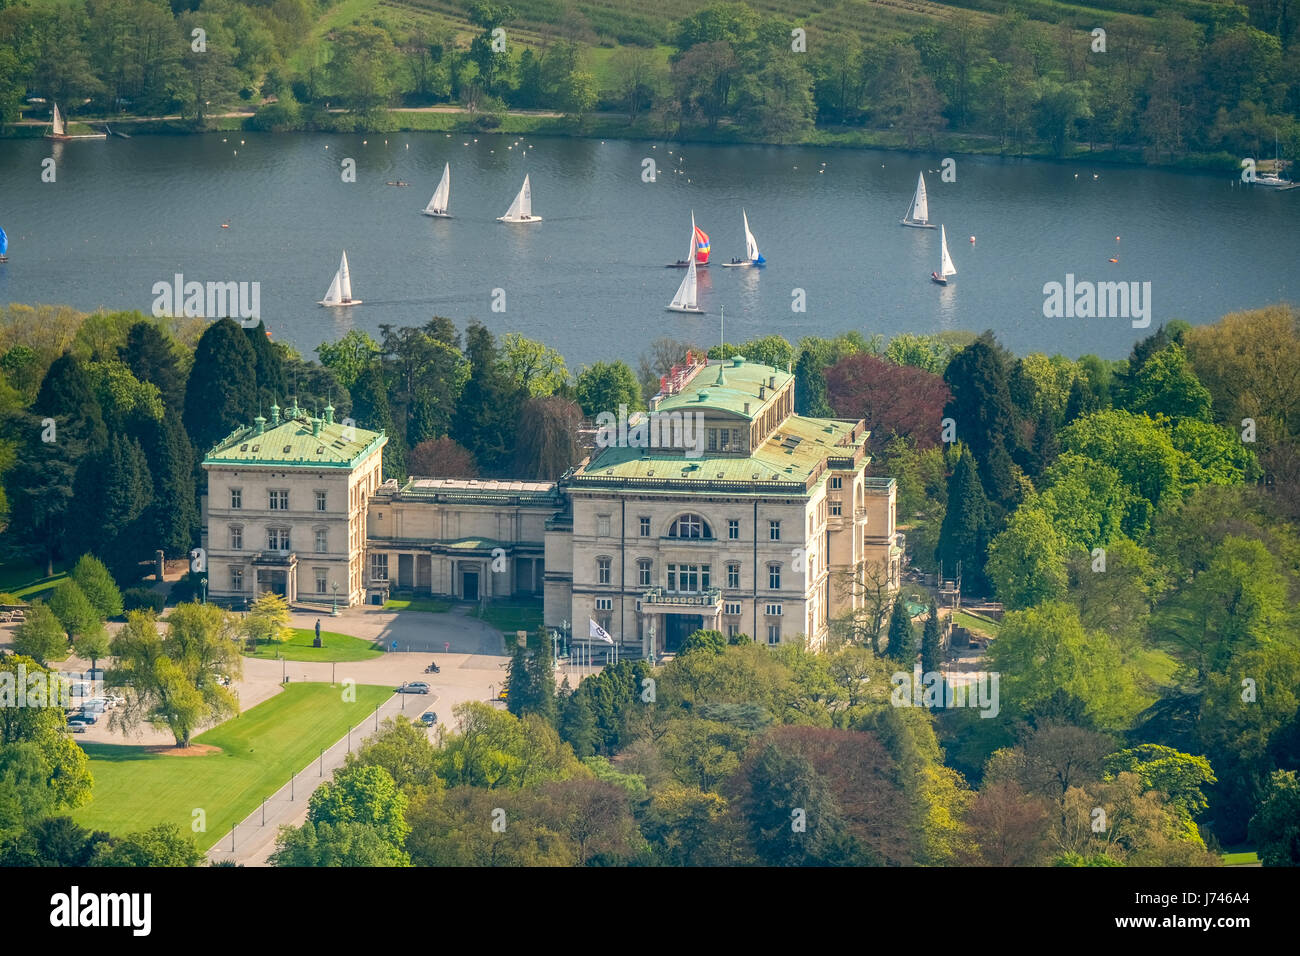 Villa Hügel with sailing boats on the Baldeneysee, historical seat of the Stahlbarone, former company headquarters of the company Krupp, historical vi Stock Photo